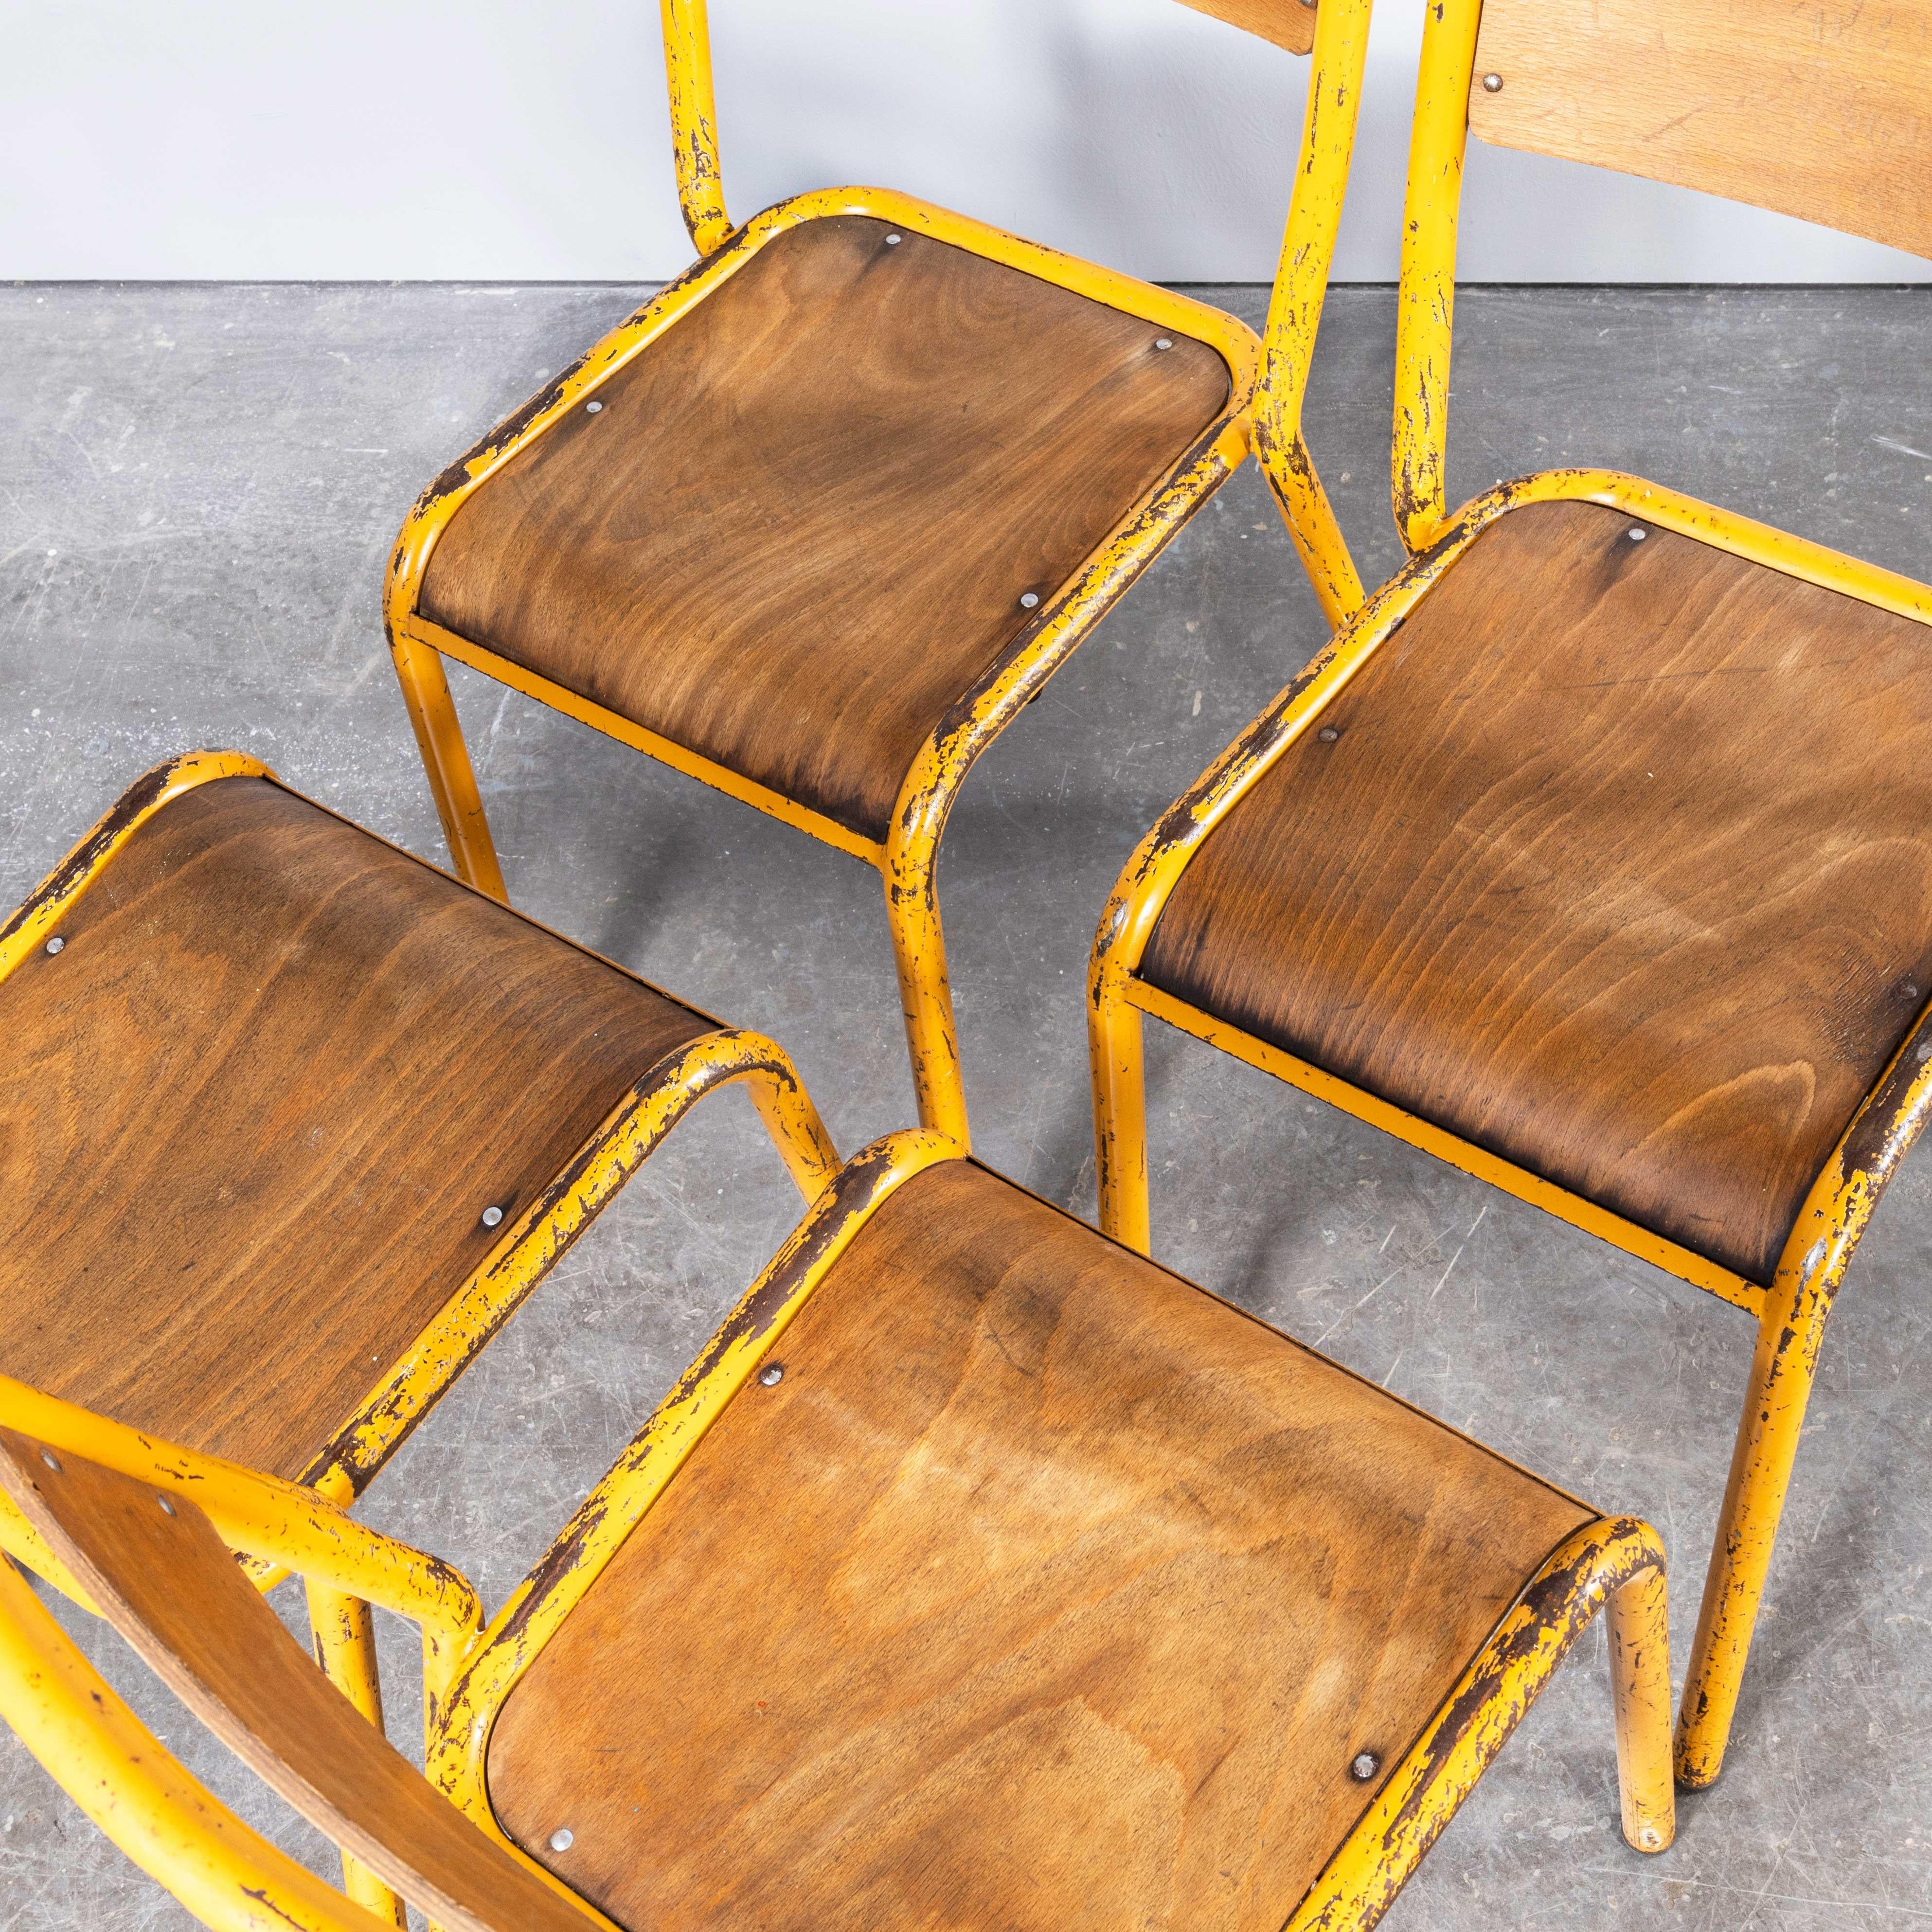 1950's Original Yellow French Tolix Wood Seat Metal Bistro Dining Chair - Large  For Sale 7